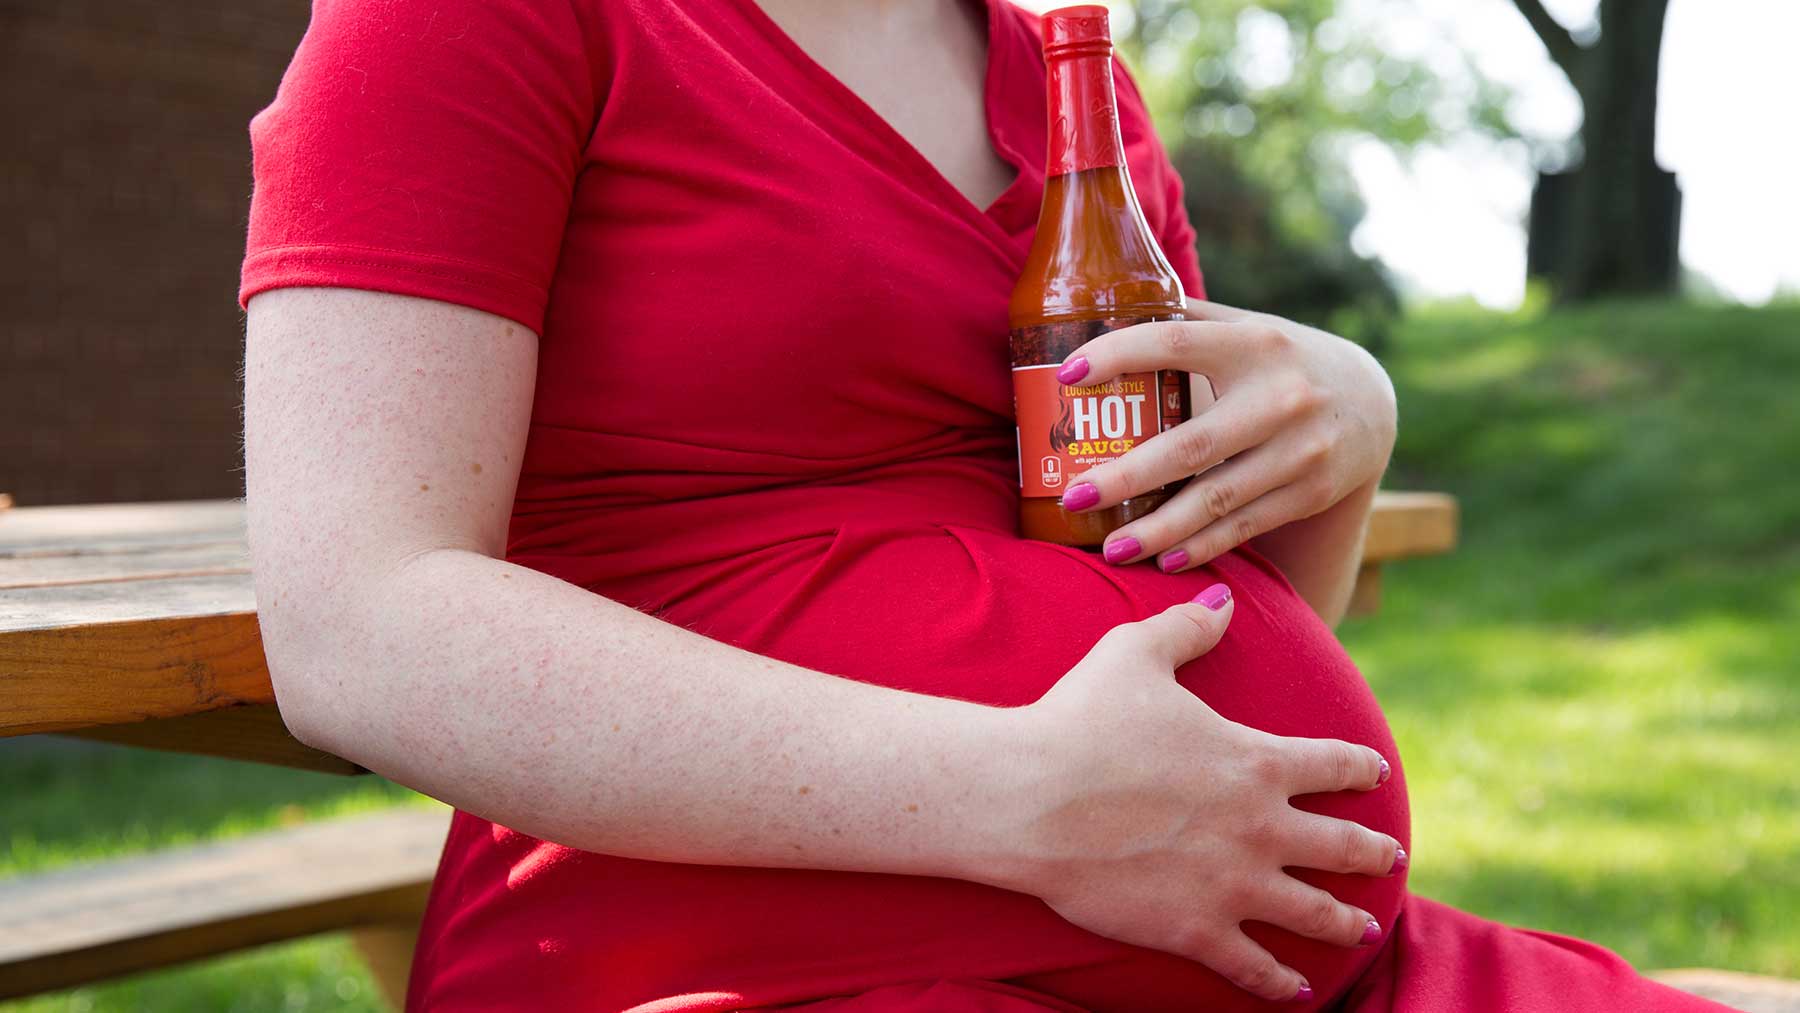 Pregnant woman holding hot sauce bottle to illustrate a common myth to start labor with spicy foods.